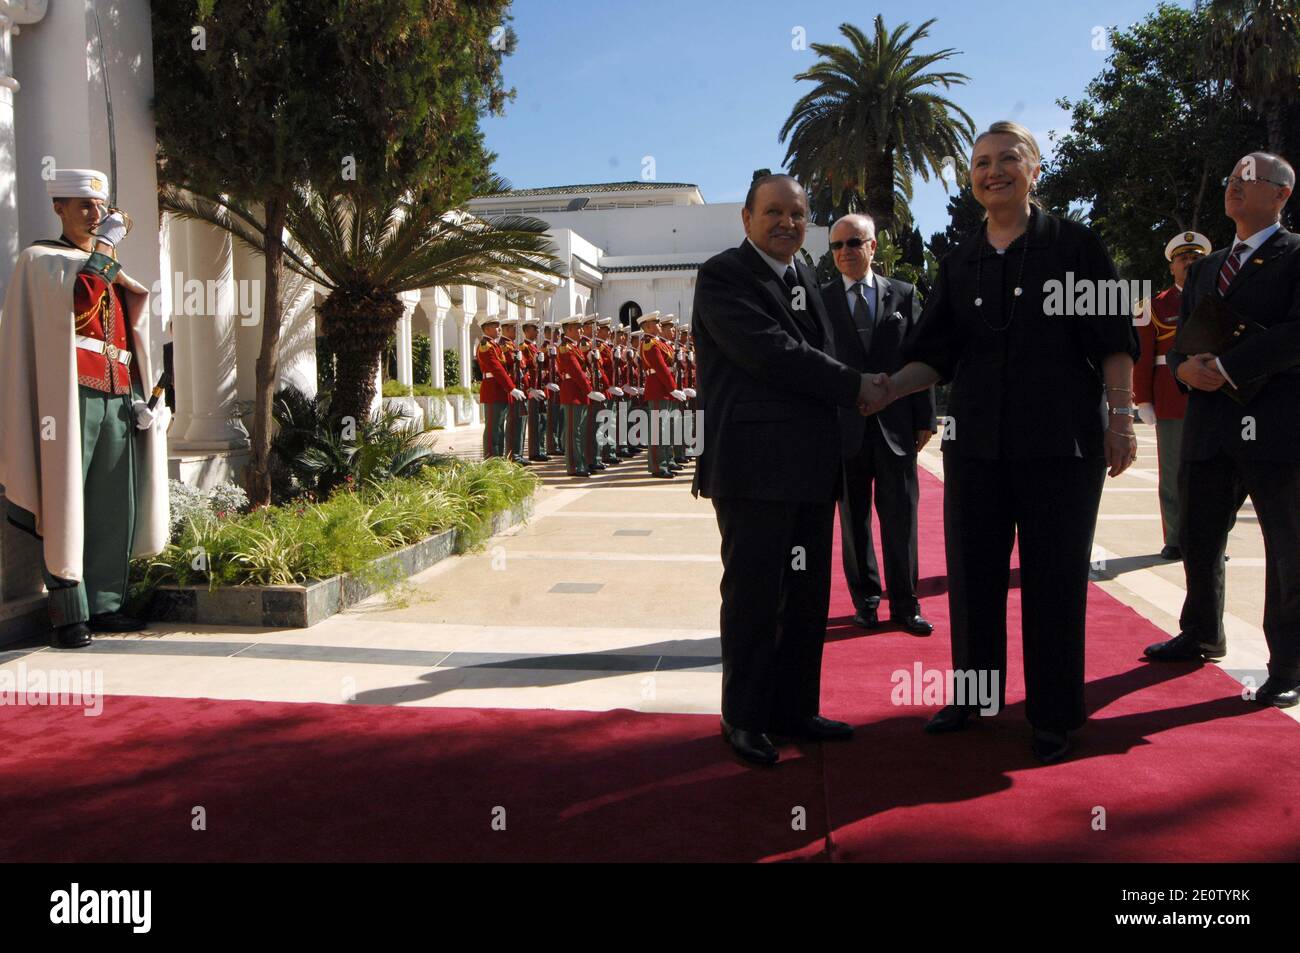 Visiting U.S. Secretary of State Hillary Clinton is welcomed by Algerian President Abdelaziz Bouteflika at the Presidency in Algiers, Algeria, on Oct. 29, 2012. Clinton met Monday with Bouteflika over regional issues, especially the situation in Mali, the official APS news agency reported. Photo by Zinou Zebar/ABACAPRESS.COM Stock Photo